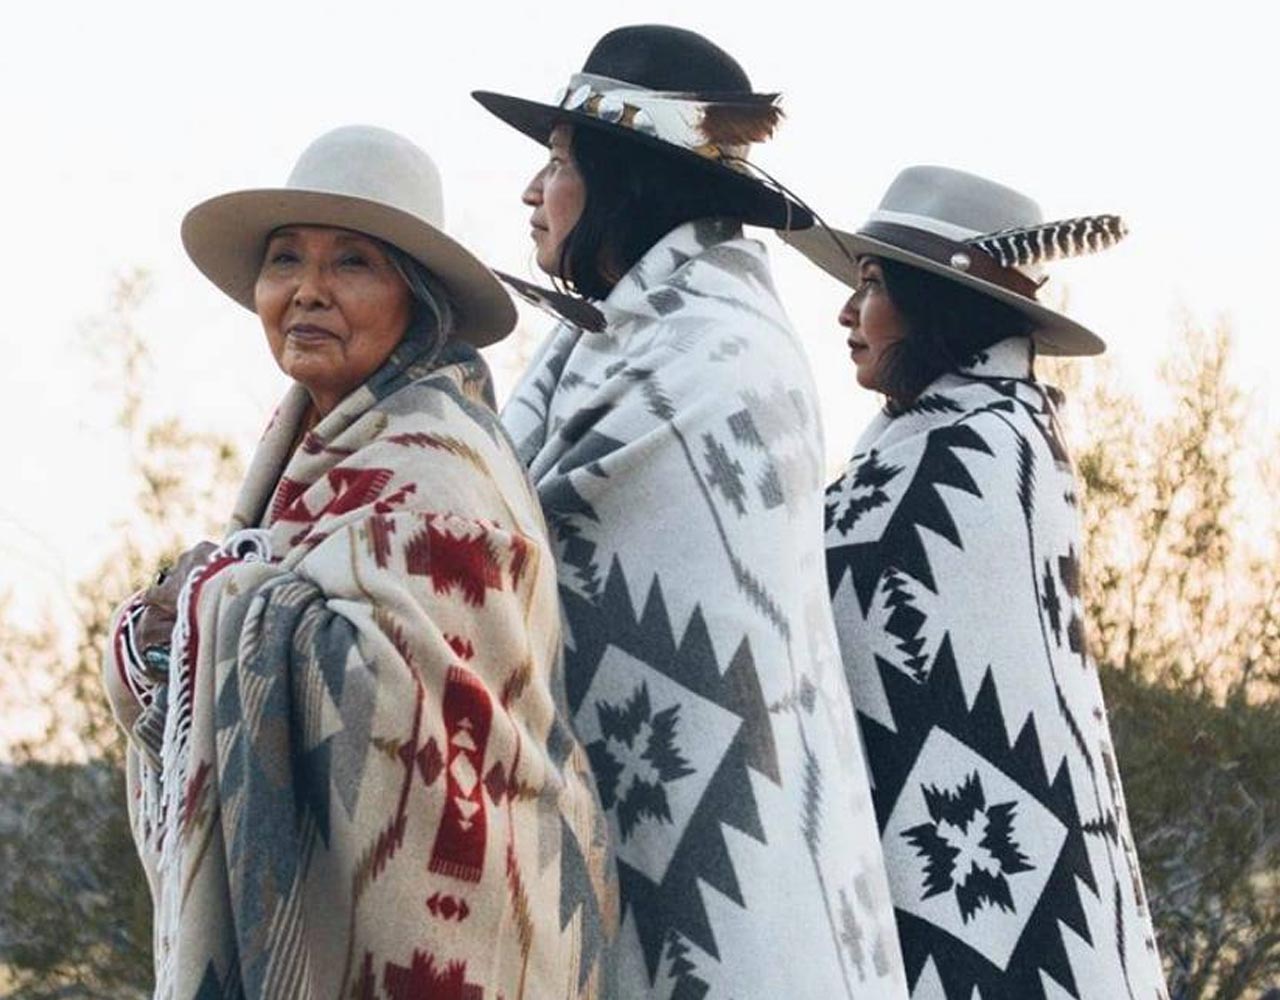 Sovereign-Bodies-Institute indigenous women wrapped in blankets